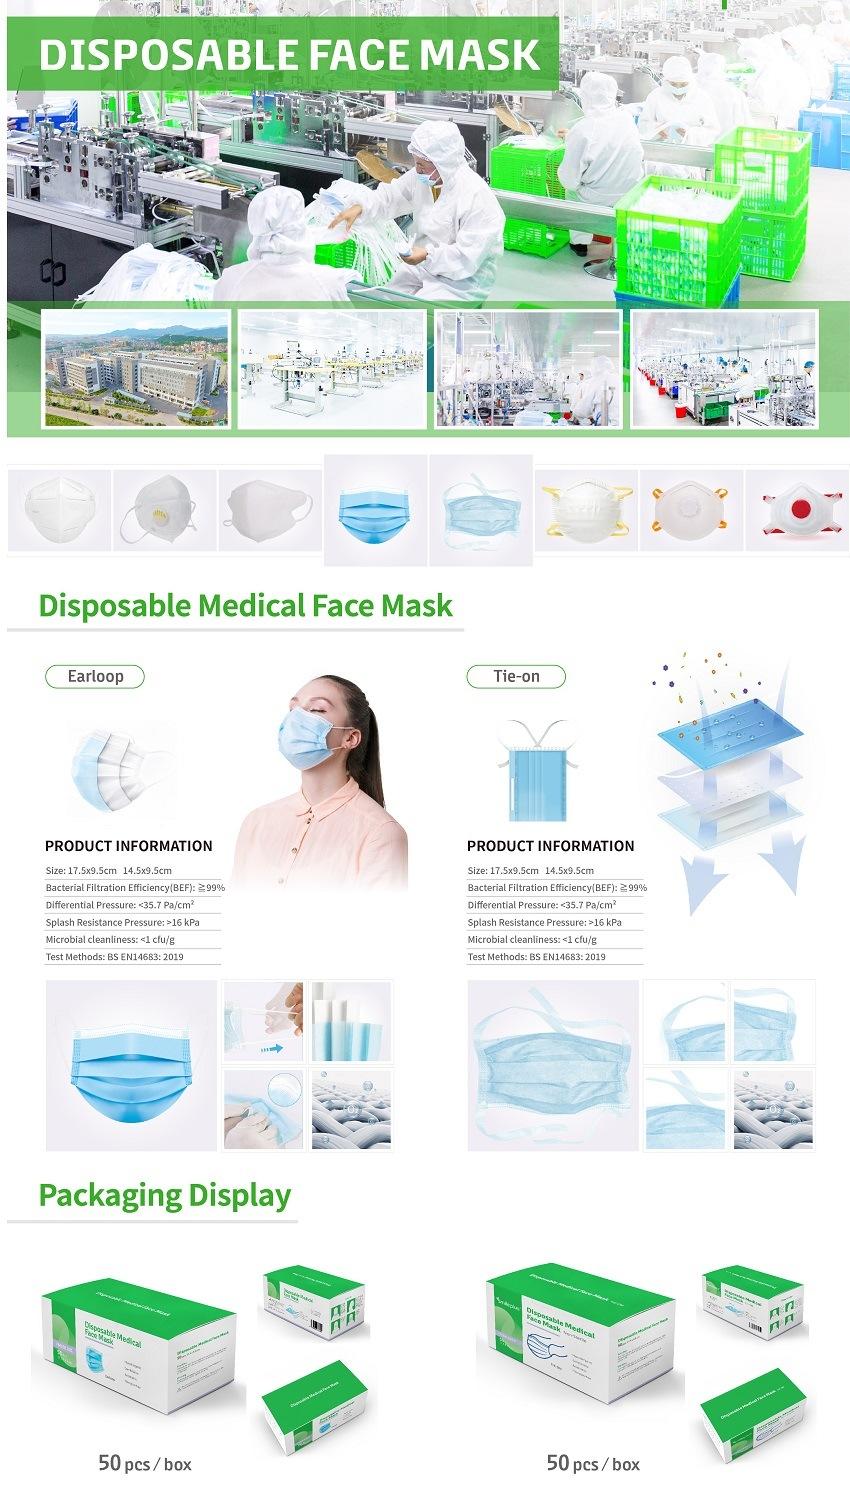 You Need Protection Face Mask, High Filtration and Ventilation Security with Valve